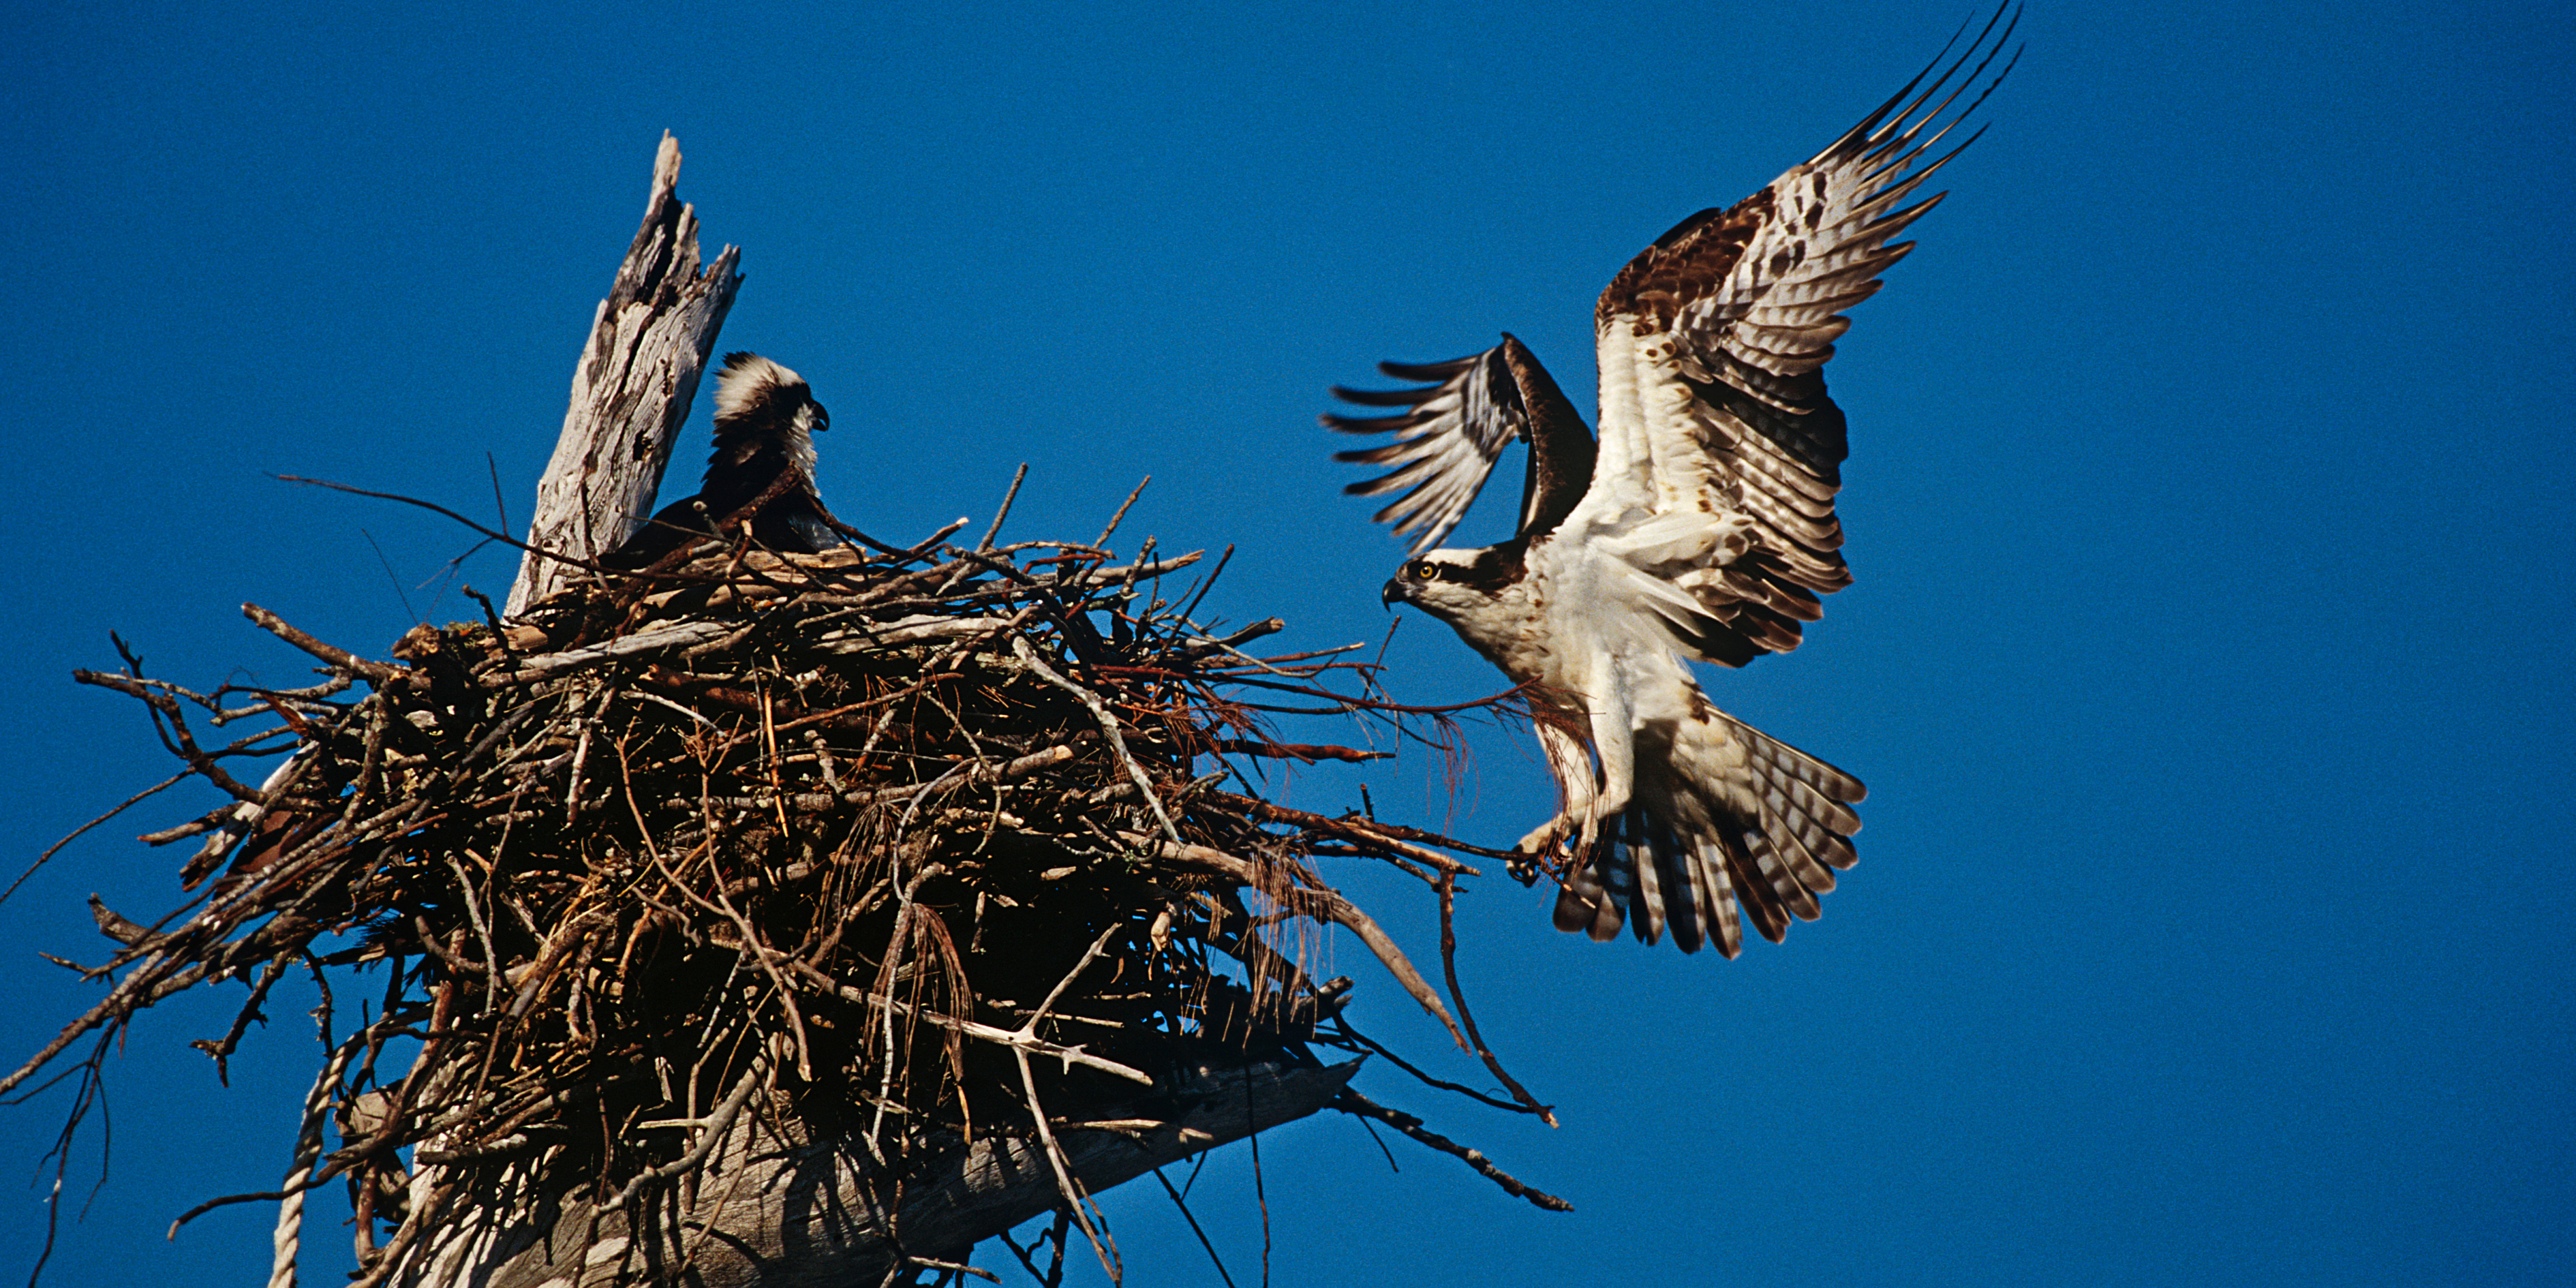 Negotiating The Return To The Nest